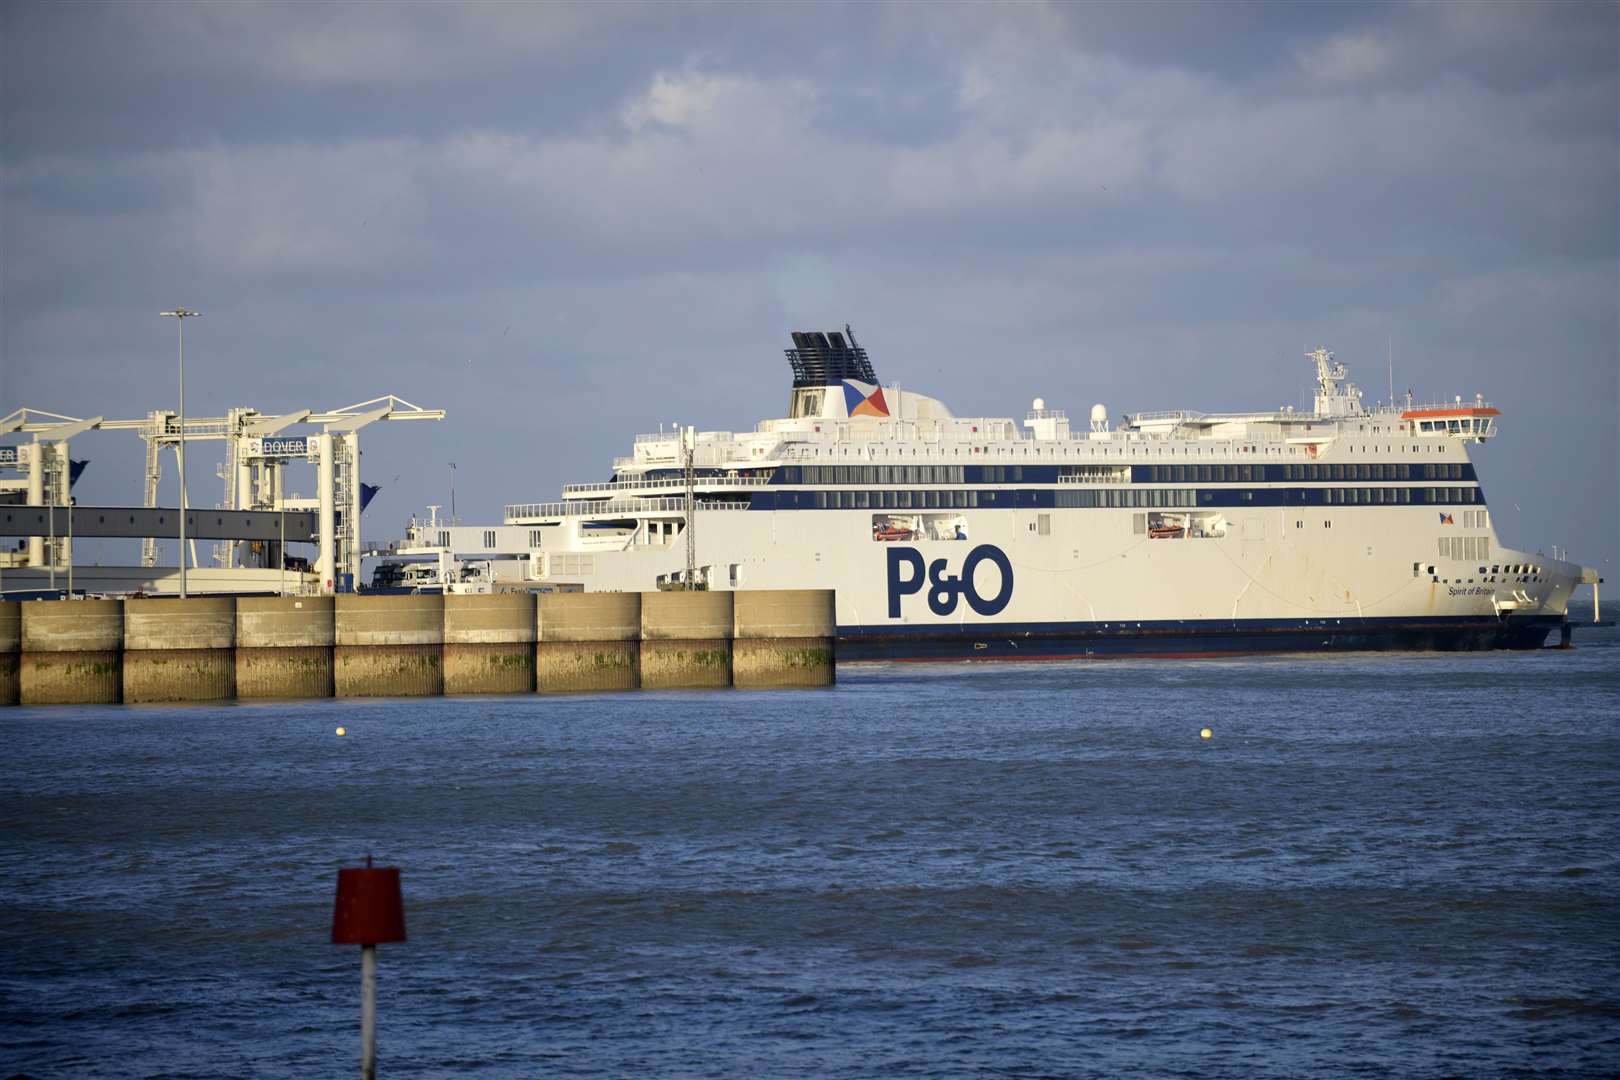 P& O Ferries, based in Dover, have announced plans to make 11000 people redundant